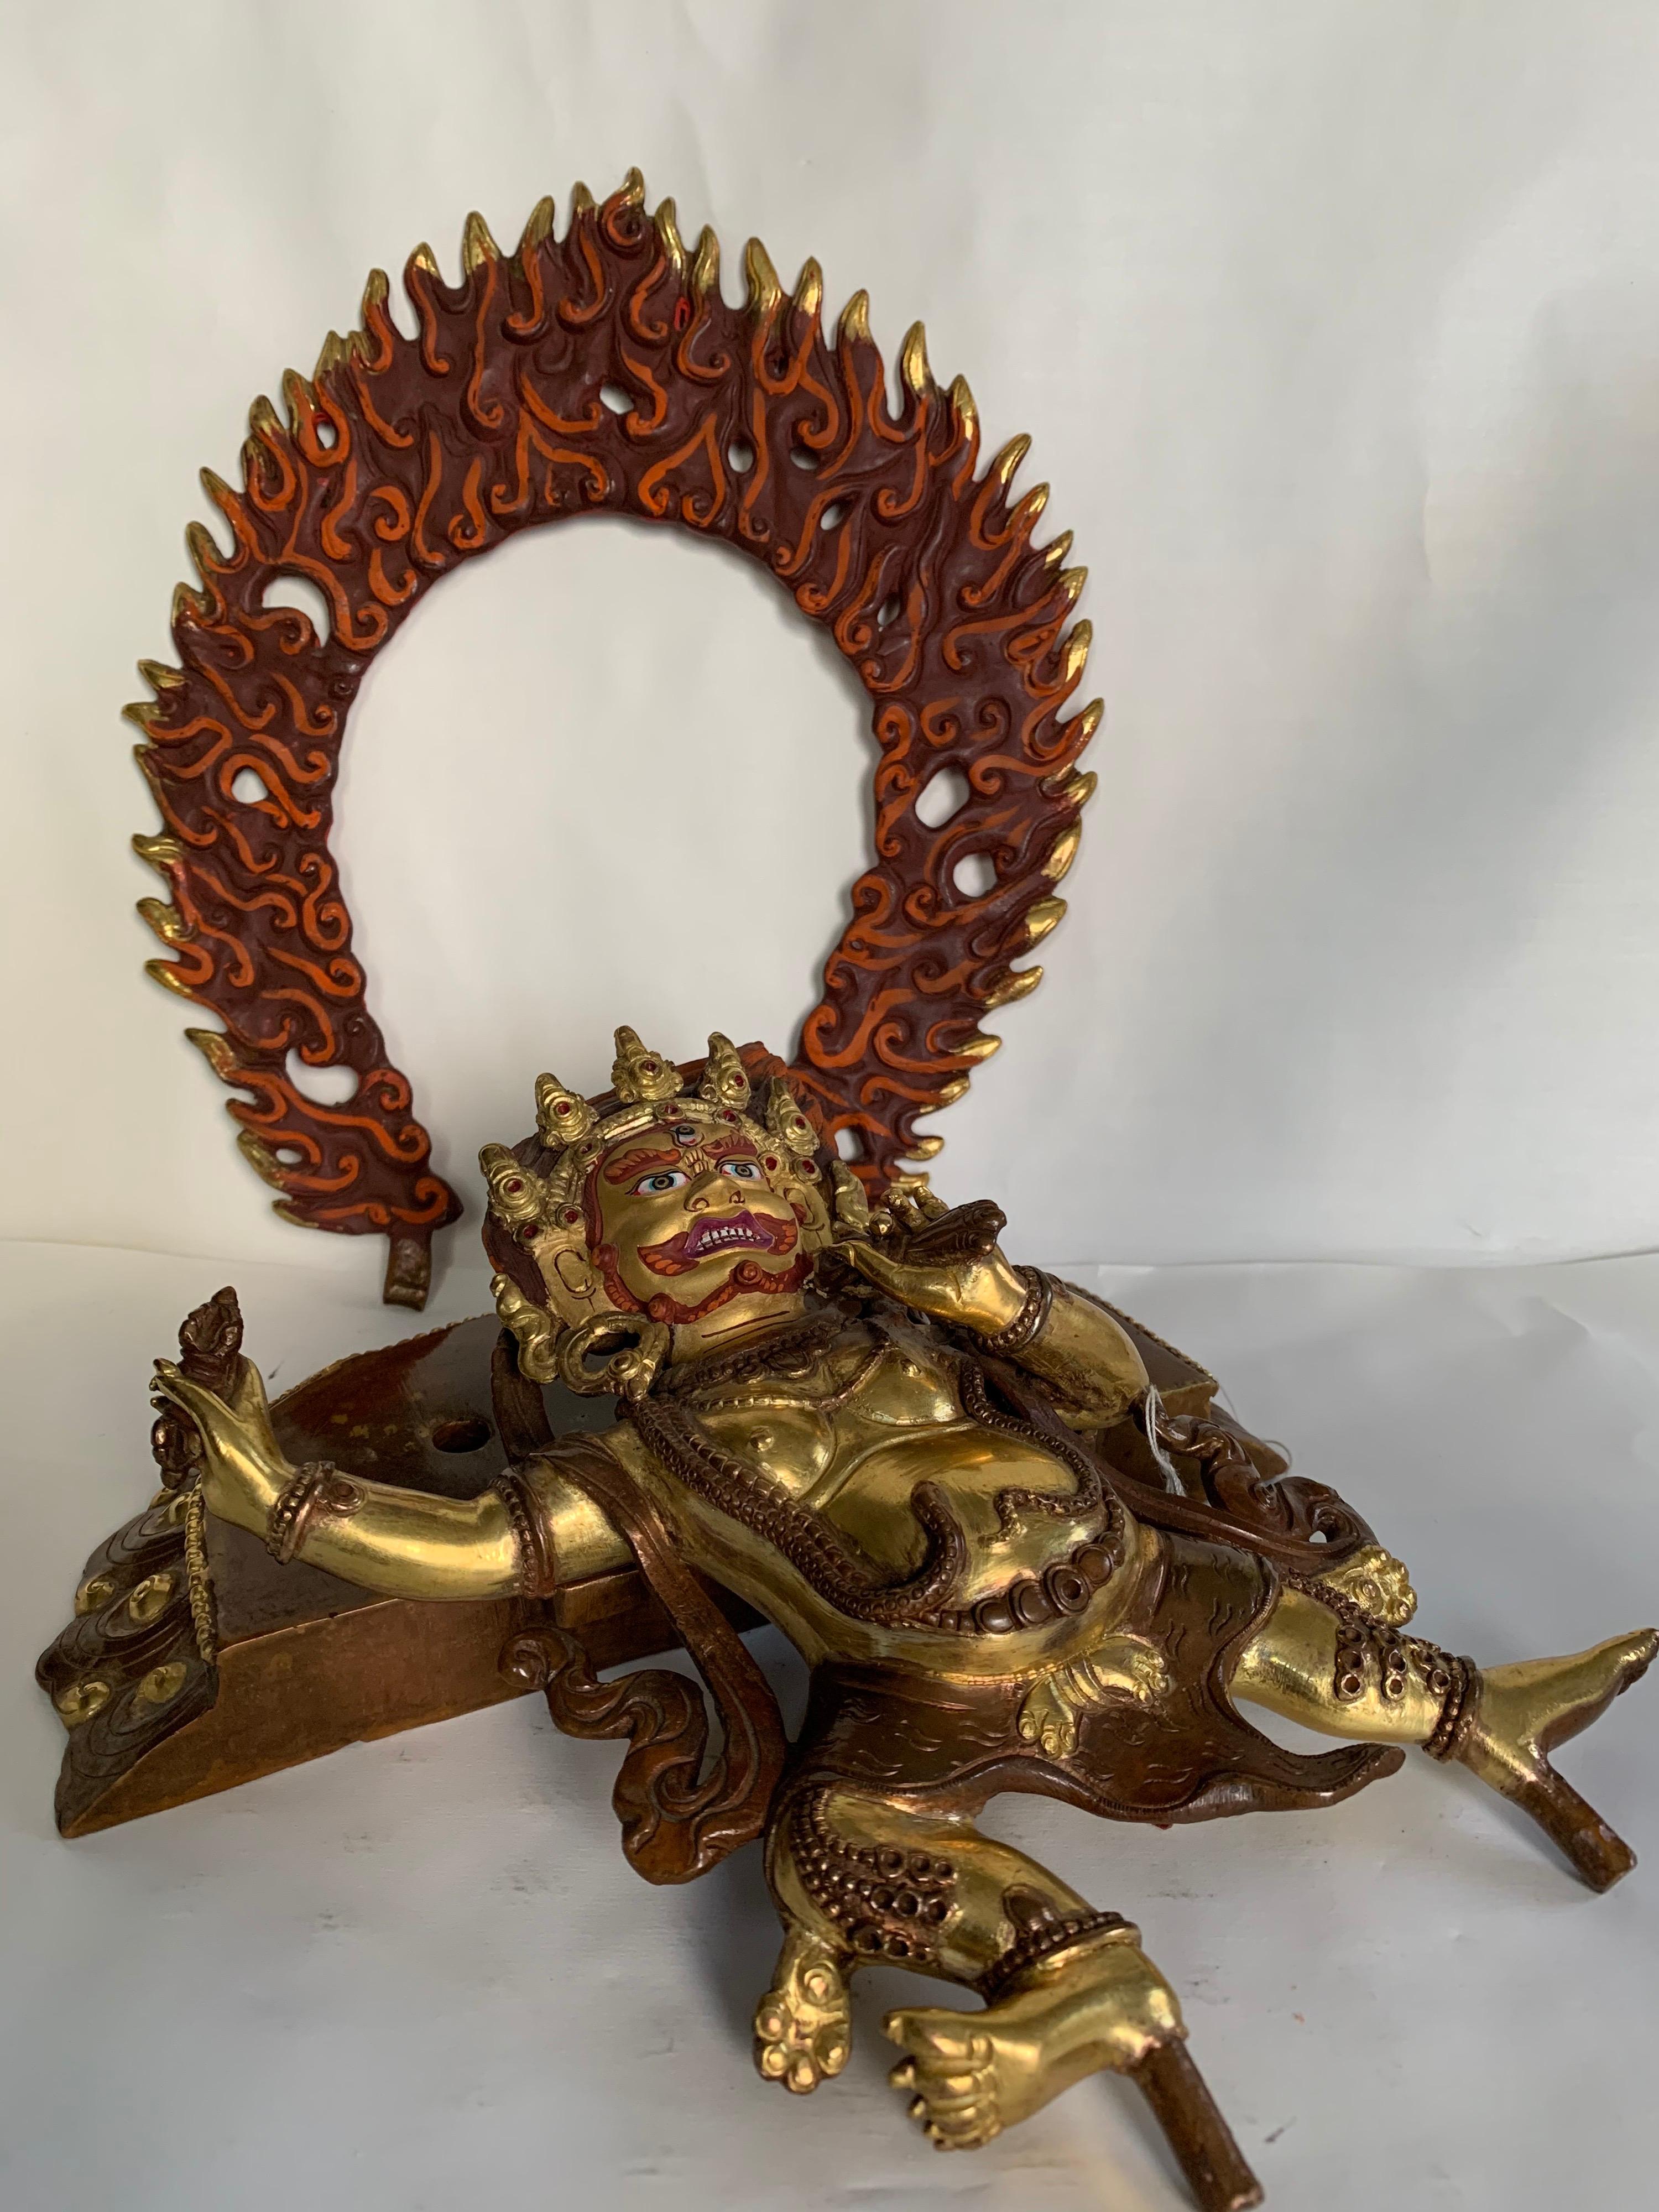 Handcrafted Vajrapani statue is made by lost wax process which is one of the ancient method of metal craft. It has a halo of fire flames behind the figure. The statue has a overlay of 24 carat gold over copper. Vajrapani is a wrathful deity of